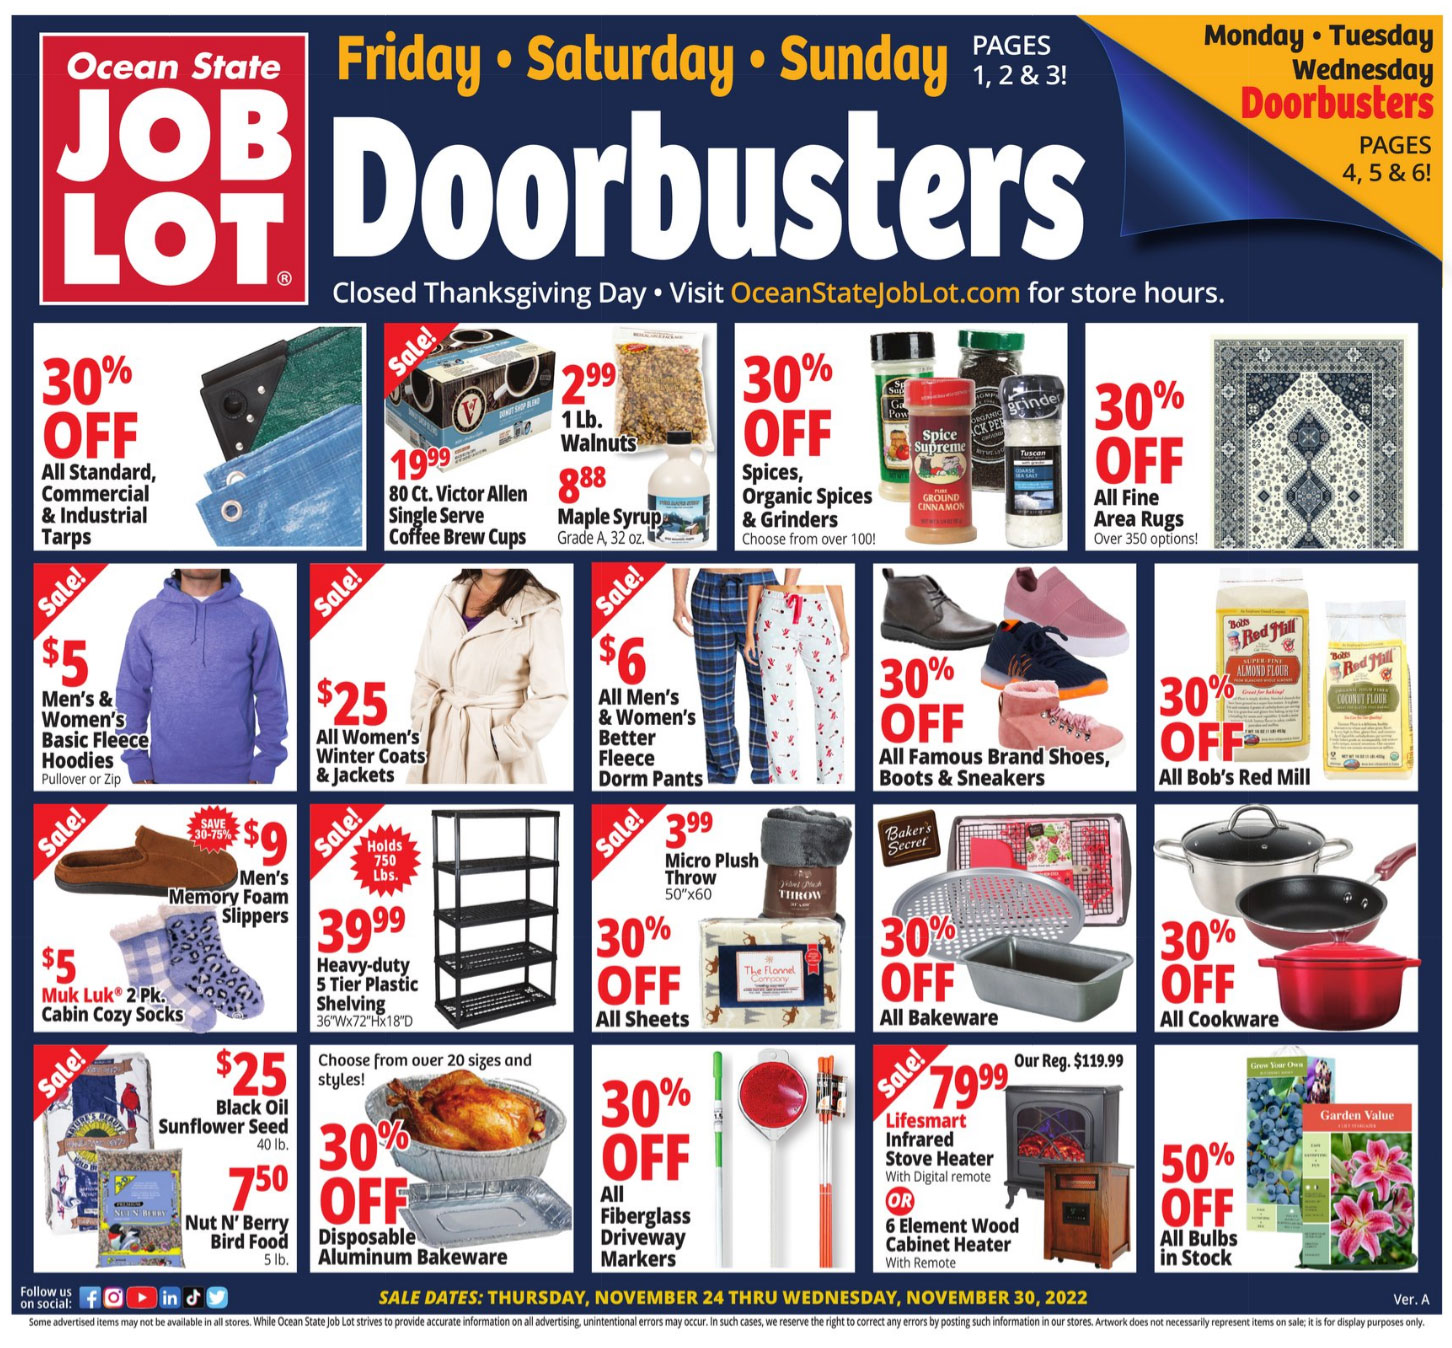 Ocean State Job Lot Black Friday 2022 Ad and Deals - What Department Stores Have Black Friday Deals